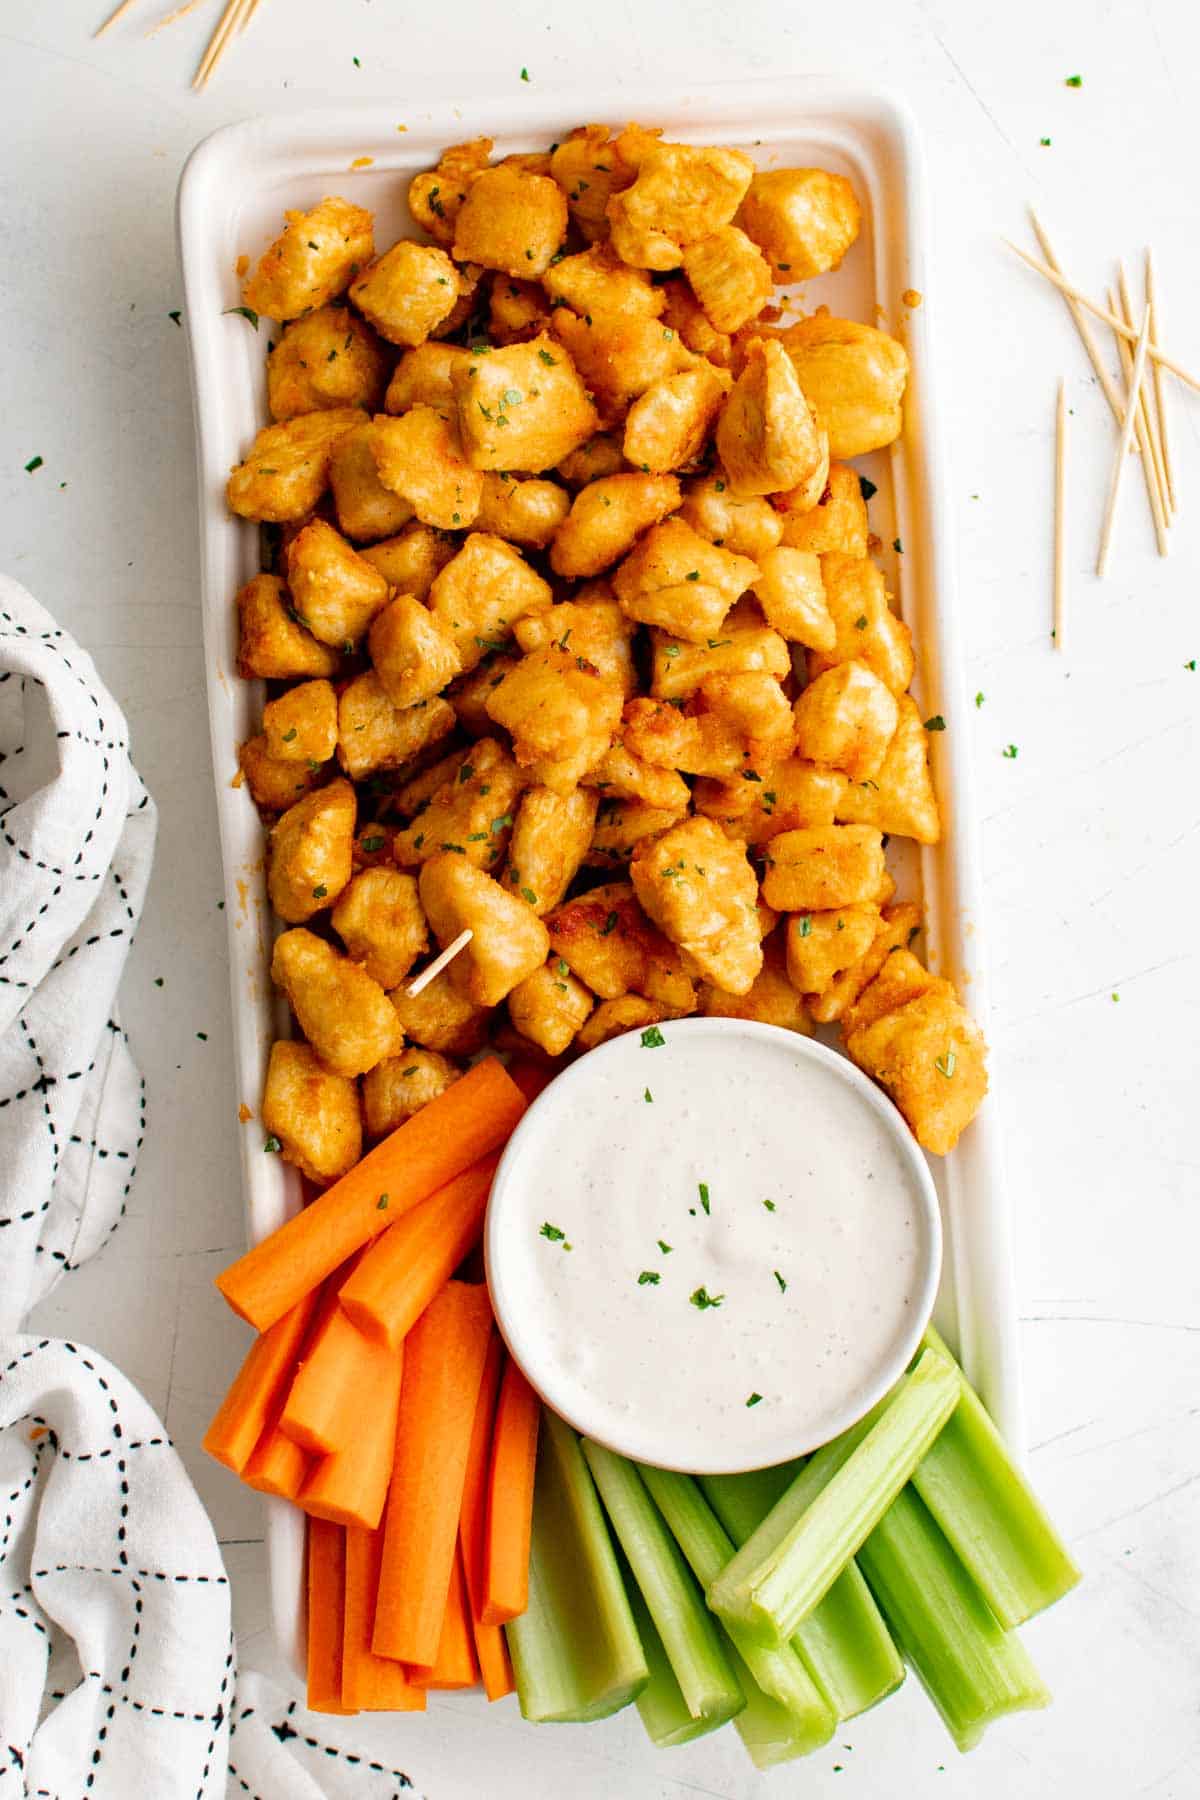 Top view of a full platter of buffalo chicken bites with a bowl of white dipping sauce and crudités.